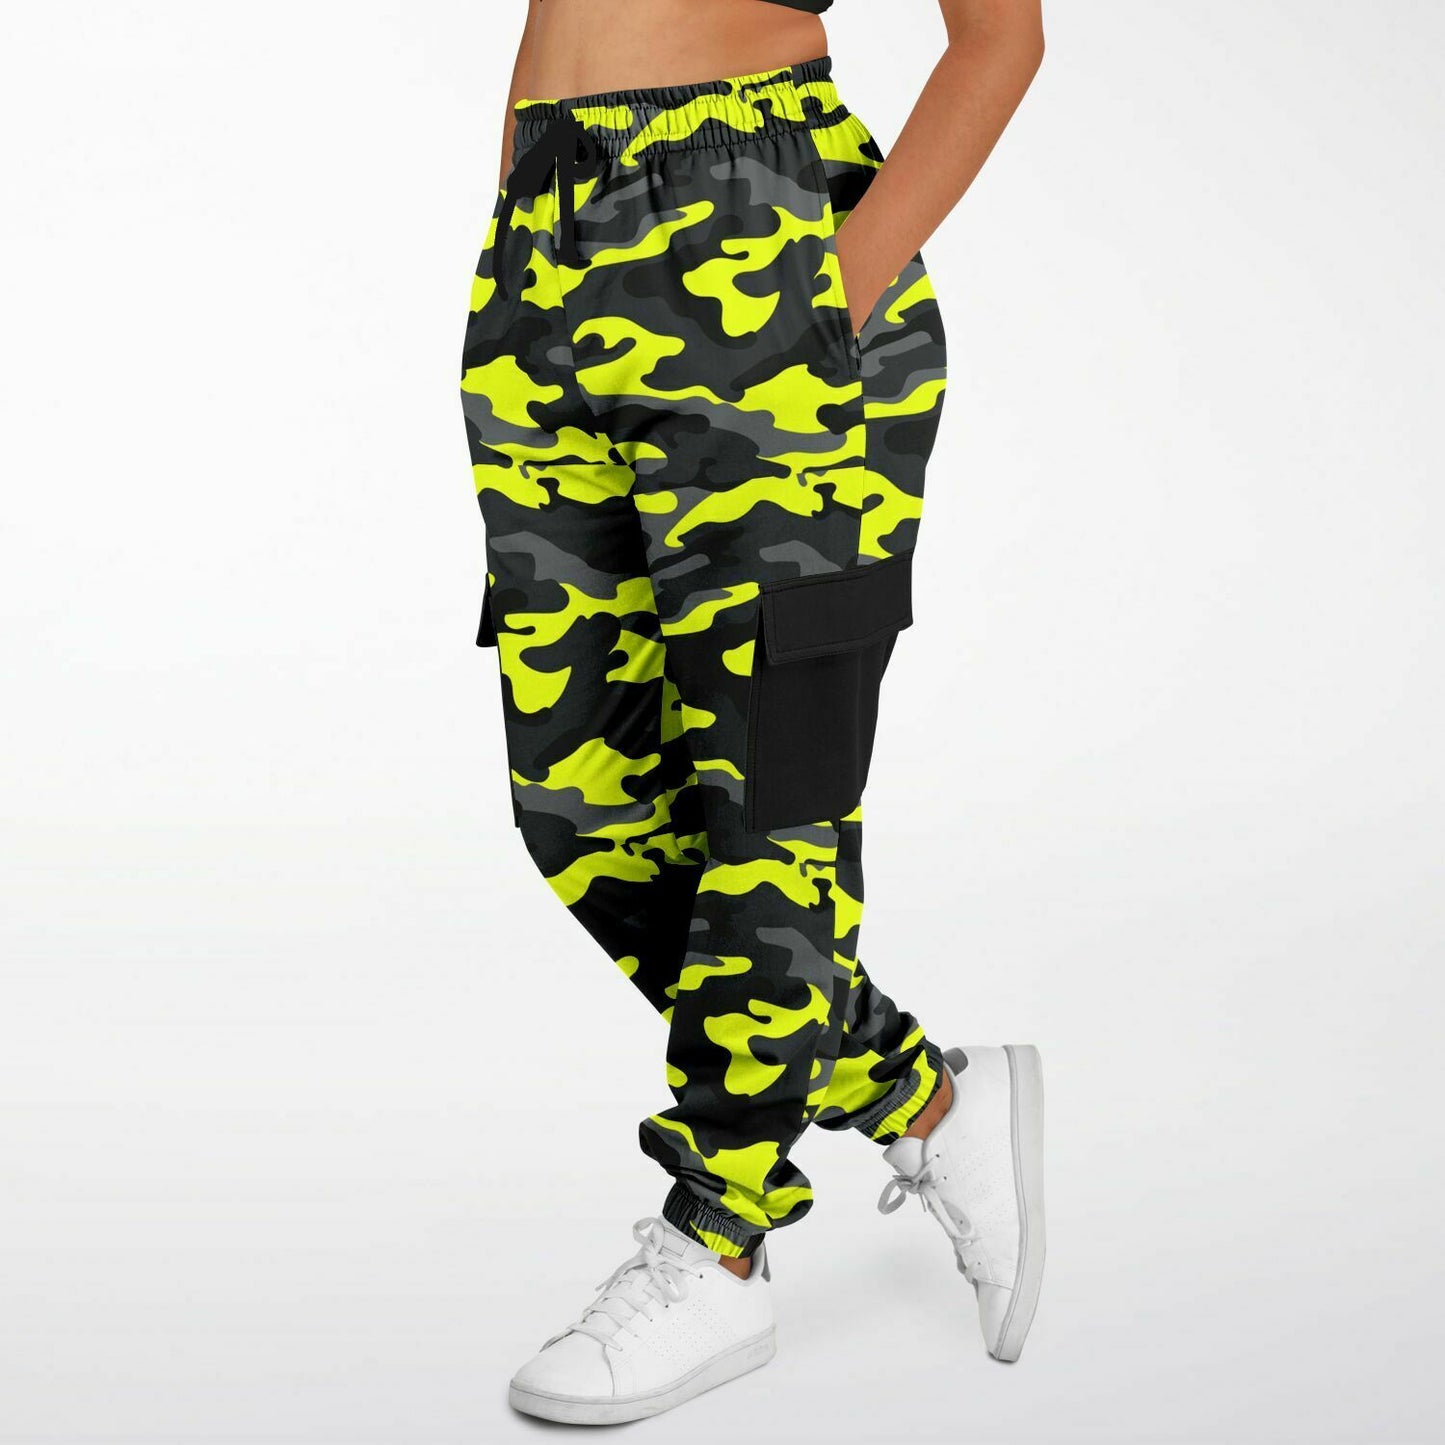 (A) Yellow Camouflage Sweatpants